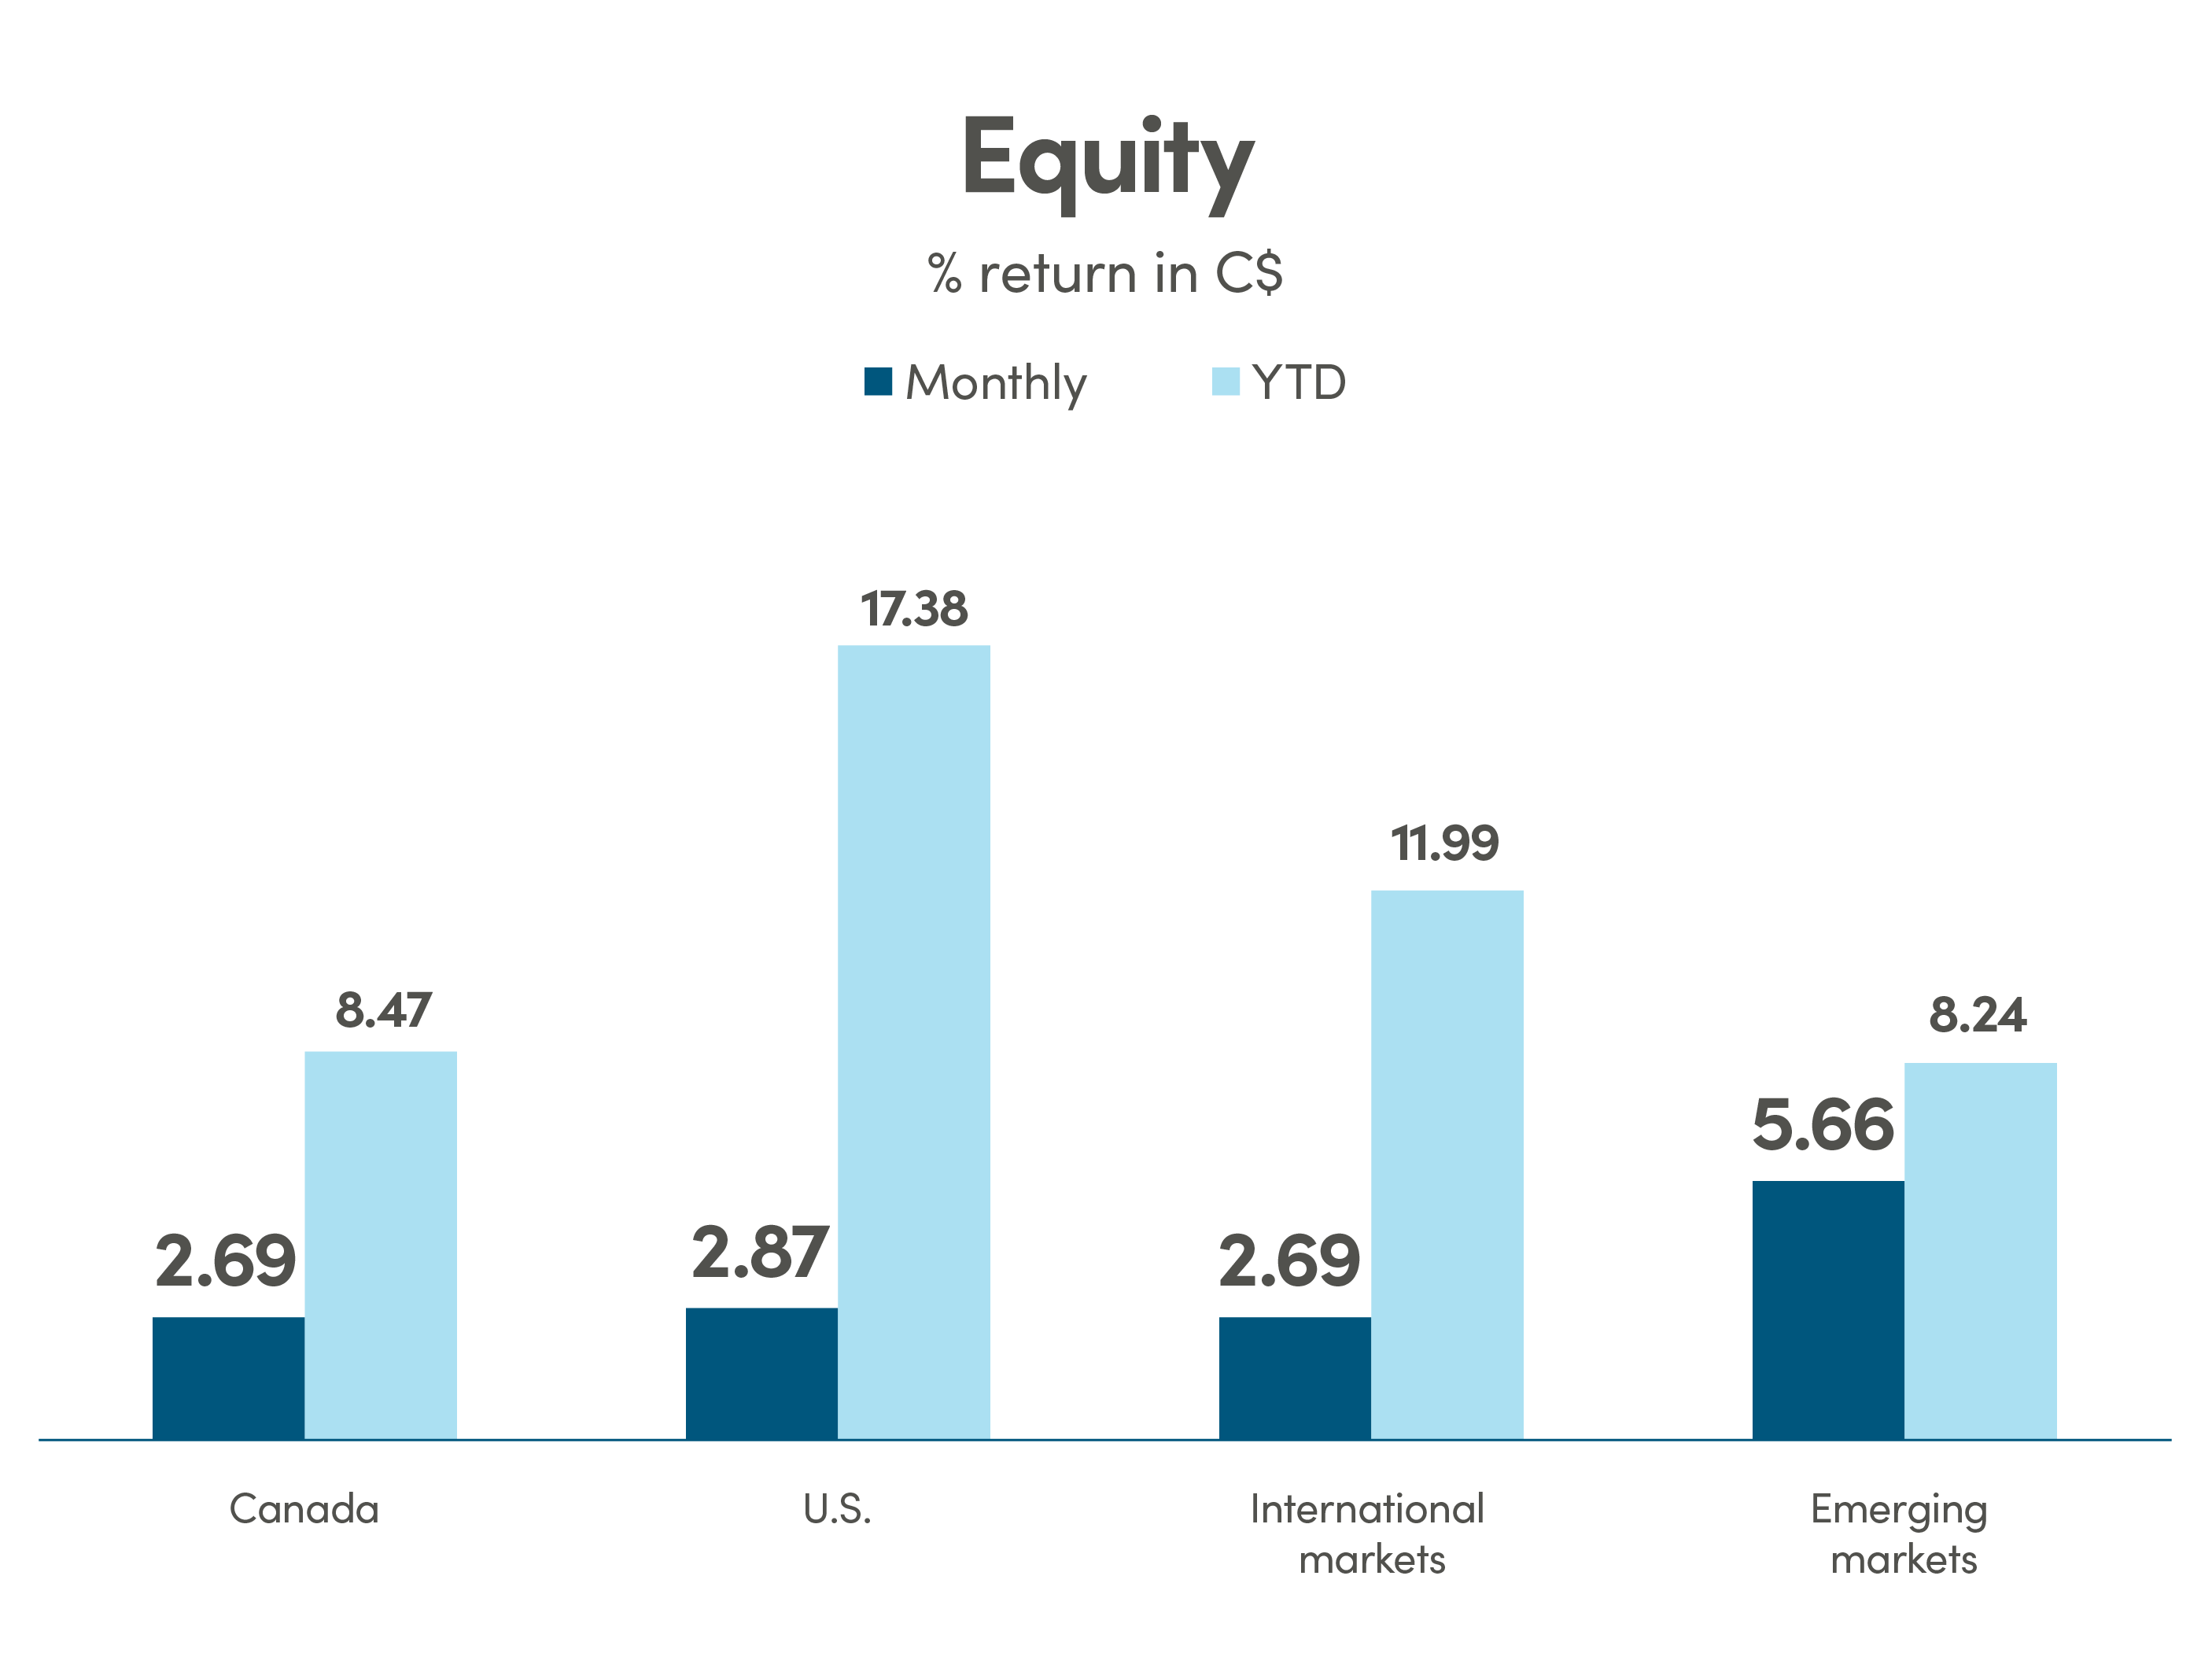 Bar graph showing % return in CAD (C$) for equity. Canada monthly return is 2.69% and YTD is 8.47%. US monthly return is 2.87% and YTD is 17.38%. International markets monthly return is 2.69% and YTD is 11.99%. Emerging markets monthly return is 5.66% and YTD is 8.24%